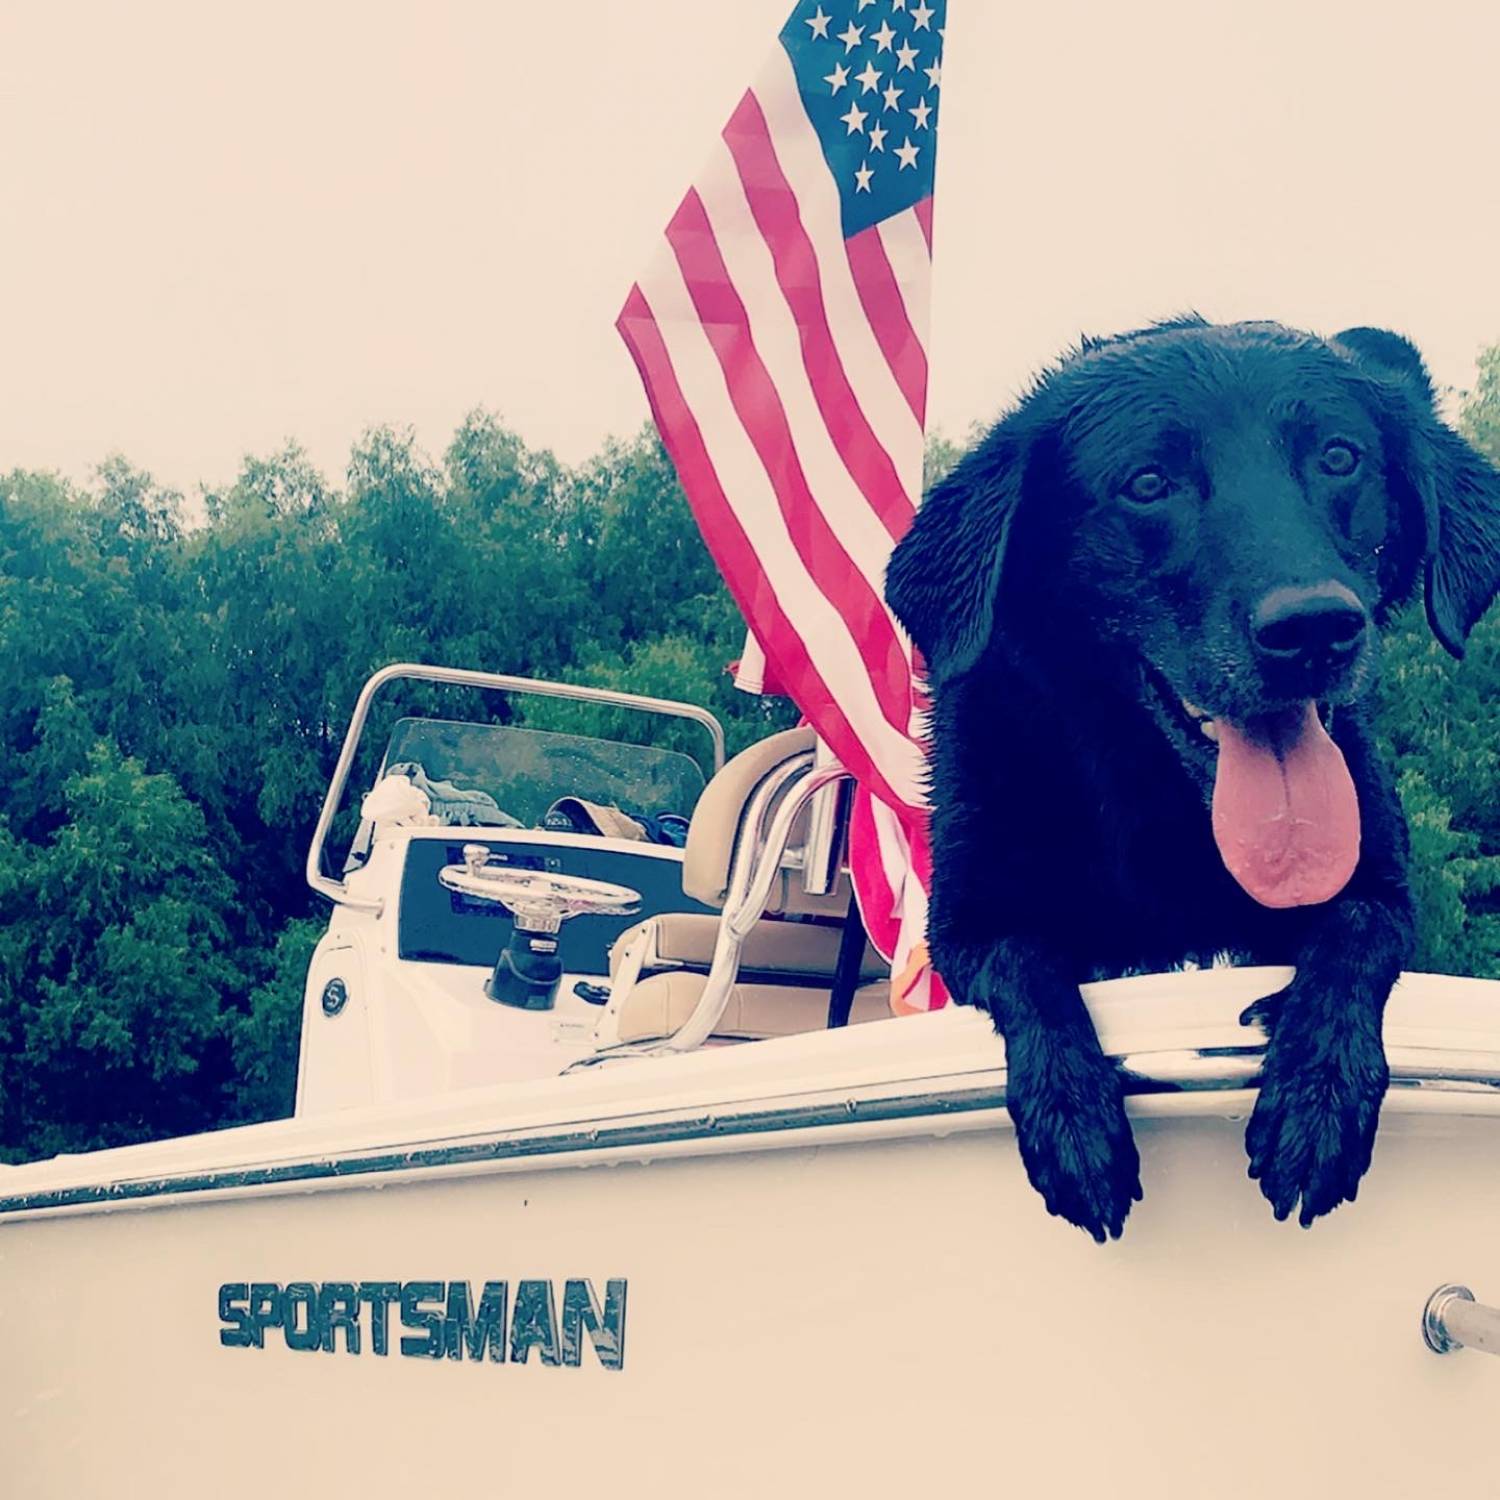 Title: American Beaux - On board their Sportsman Masters 247 Bay Boat - Location: False River, LA. Participating in the Photo Contest #SportsmanSeptember